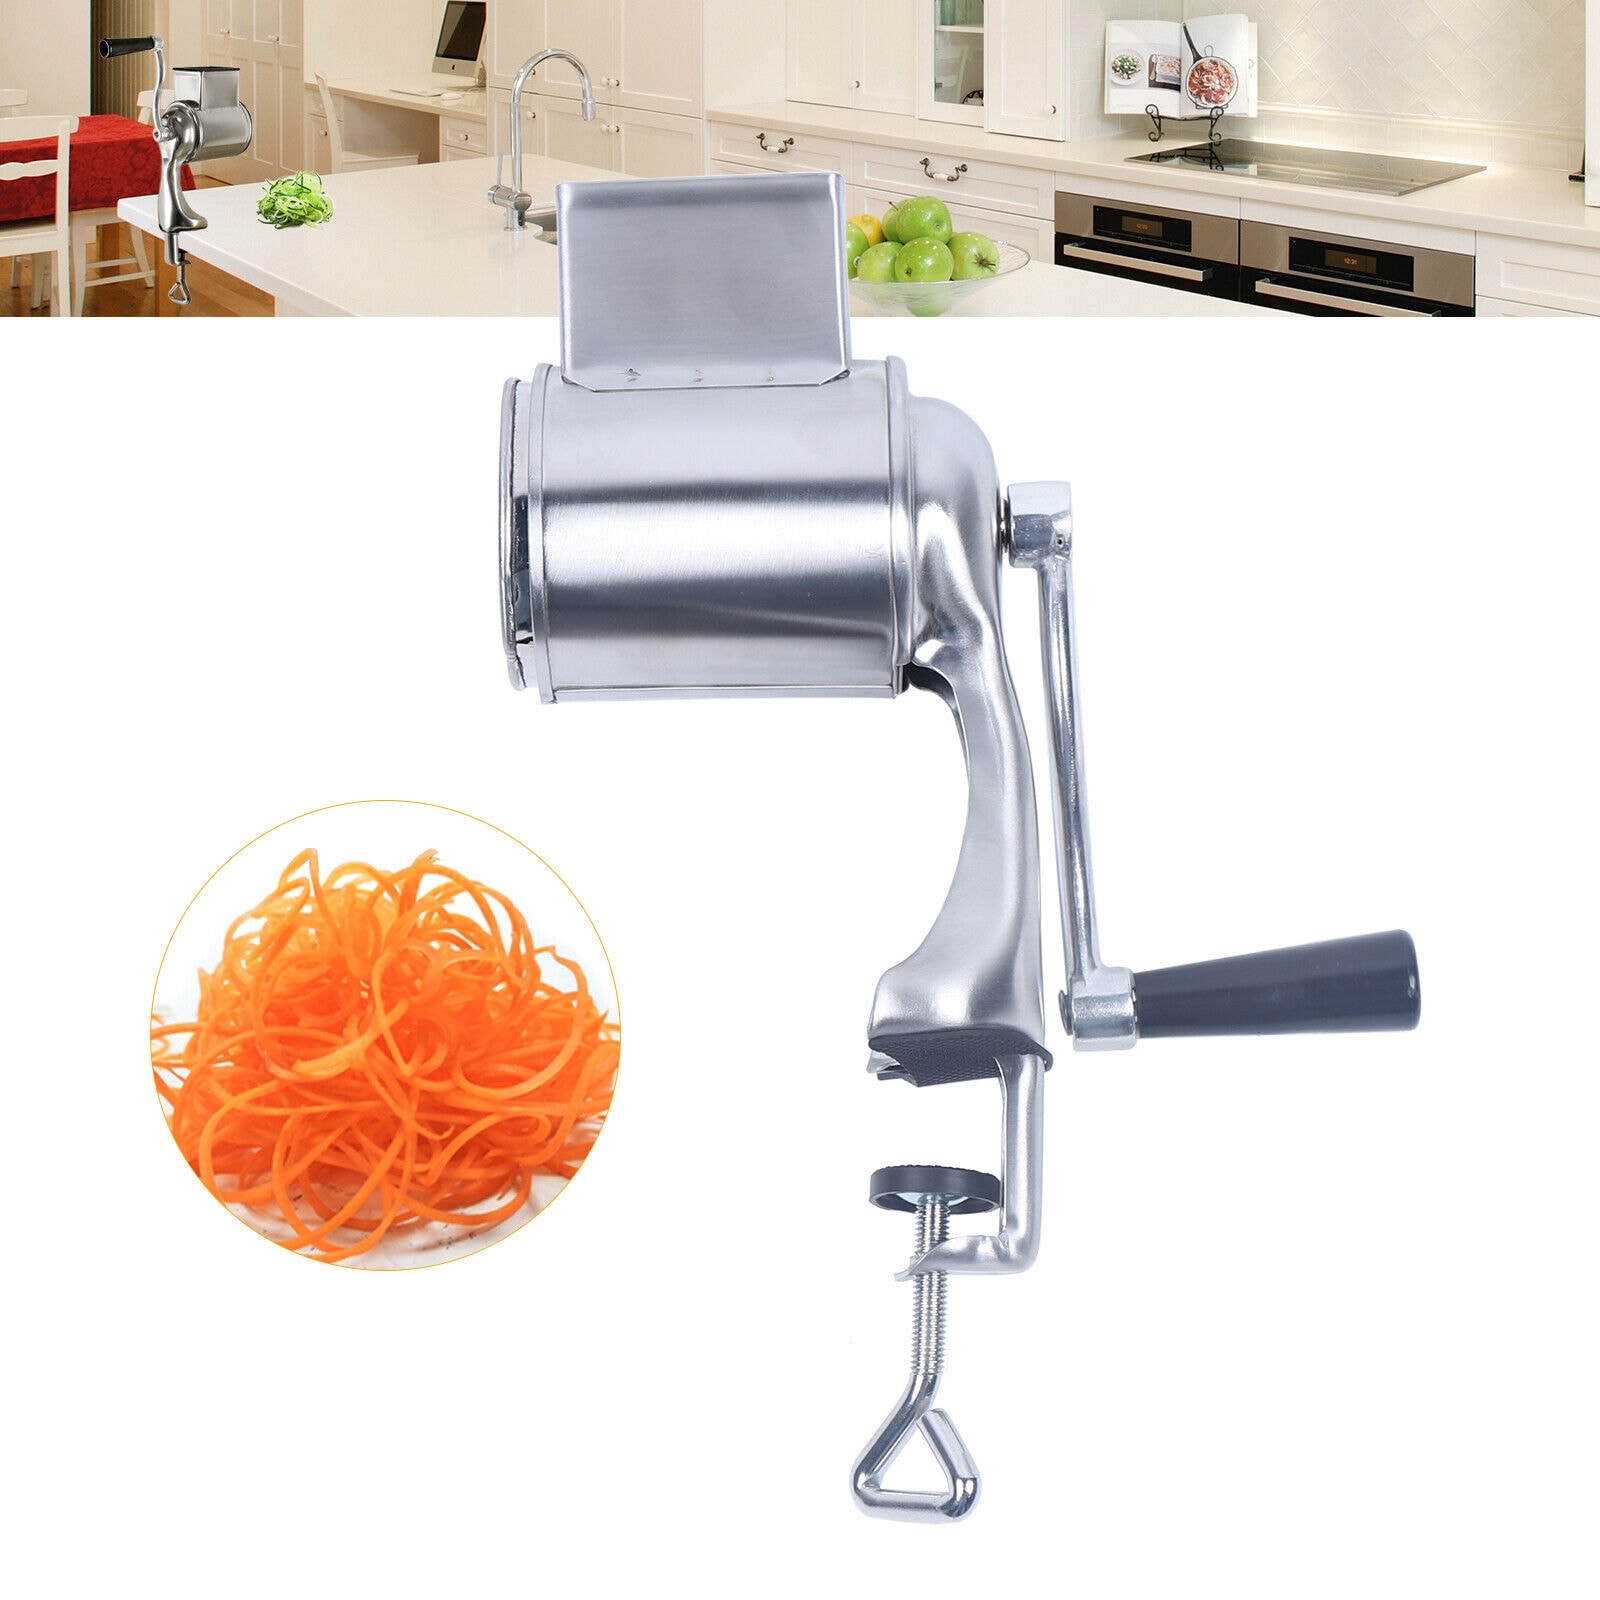 https://ak1.ostkcdn.com/images/products/is/images/direct/05aa92f36e6147bb1aa070147cd2336c73f8e184/Rotary-Grater-Food-Mills-Grinder-with-5-Drum-Blade-Grinding-Tool-Set.jpg